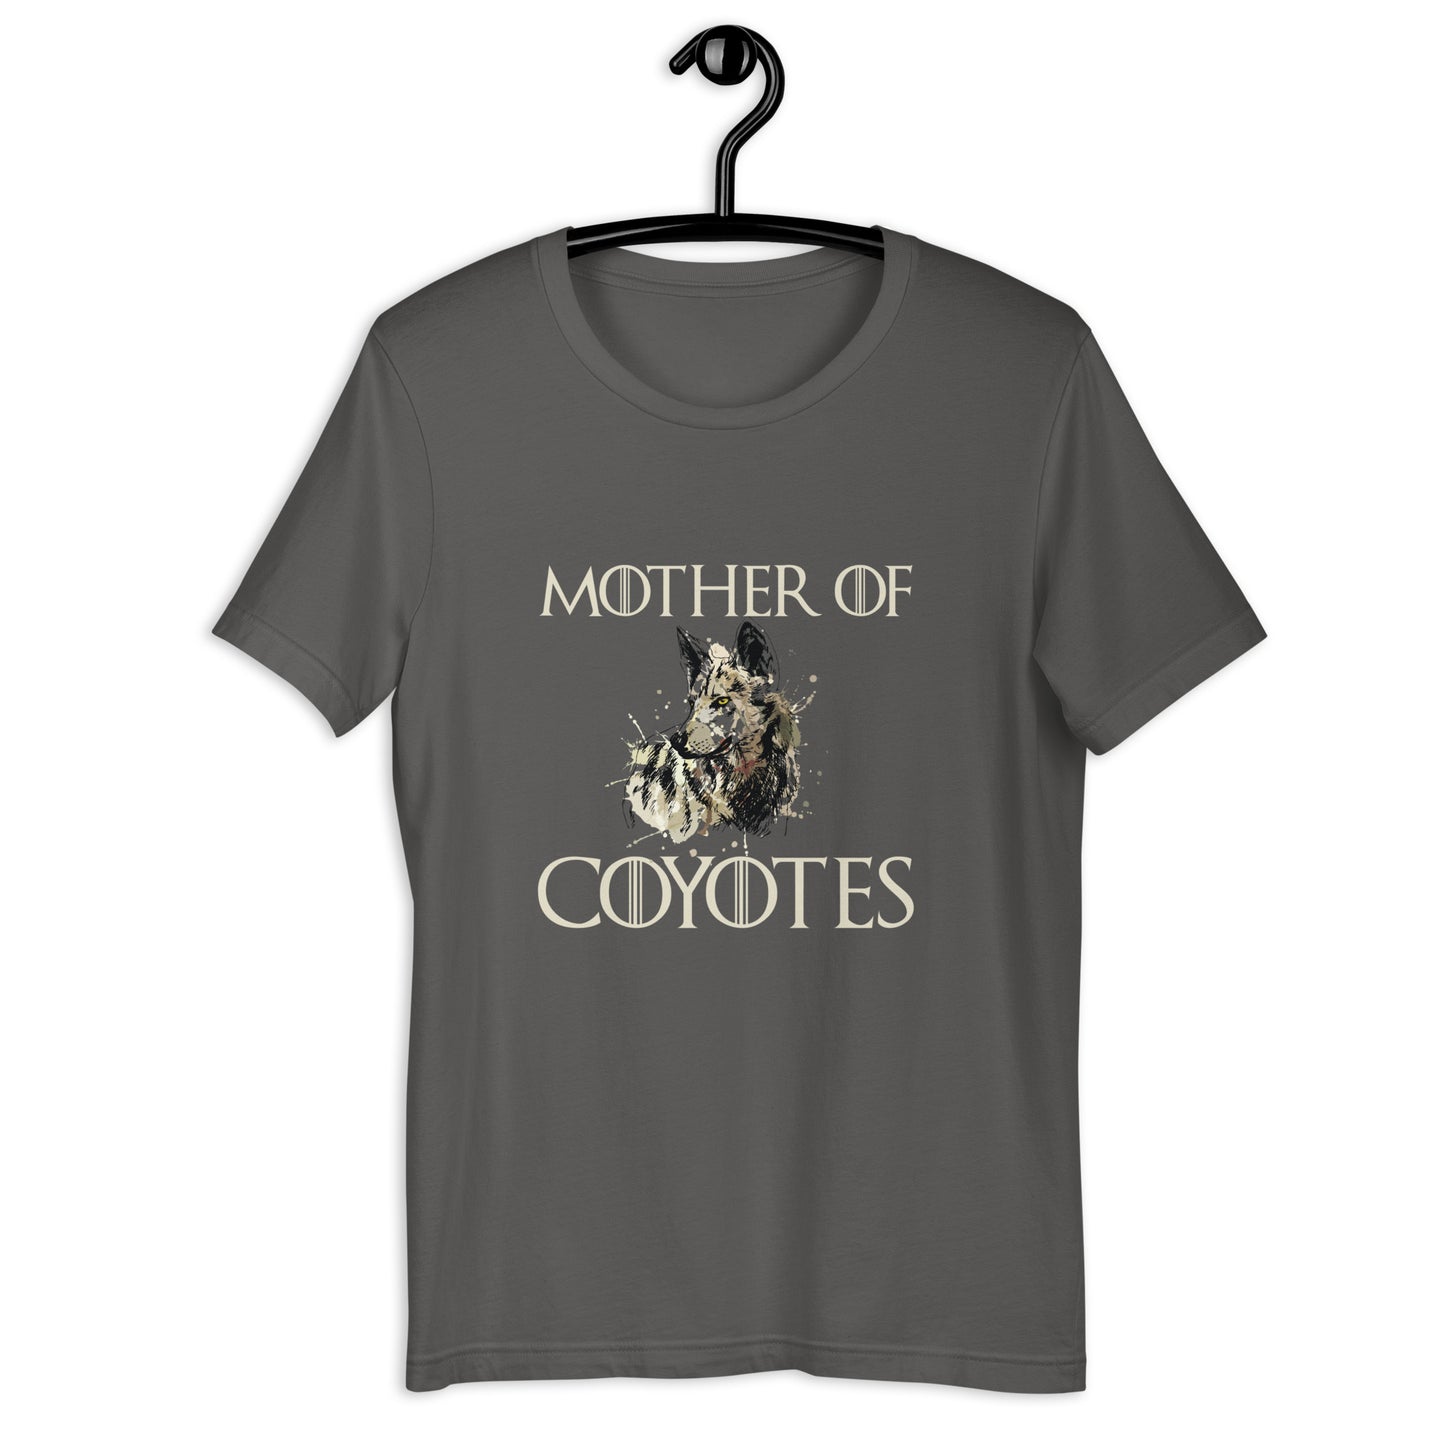 MOTHER OF COYOTES - Unisex t-shirt